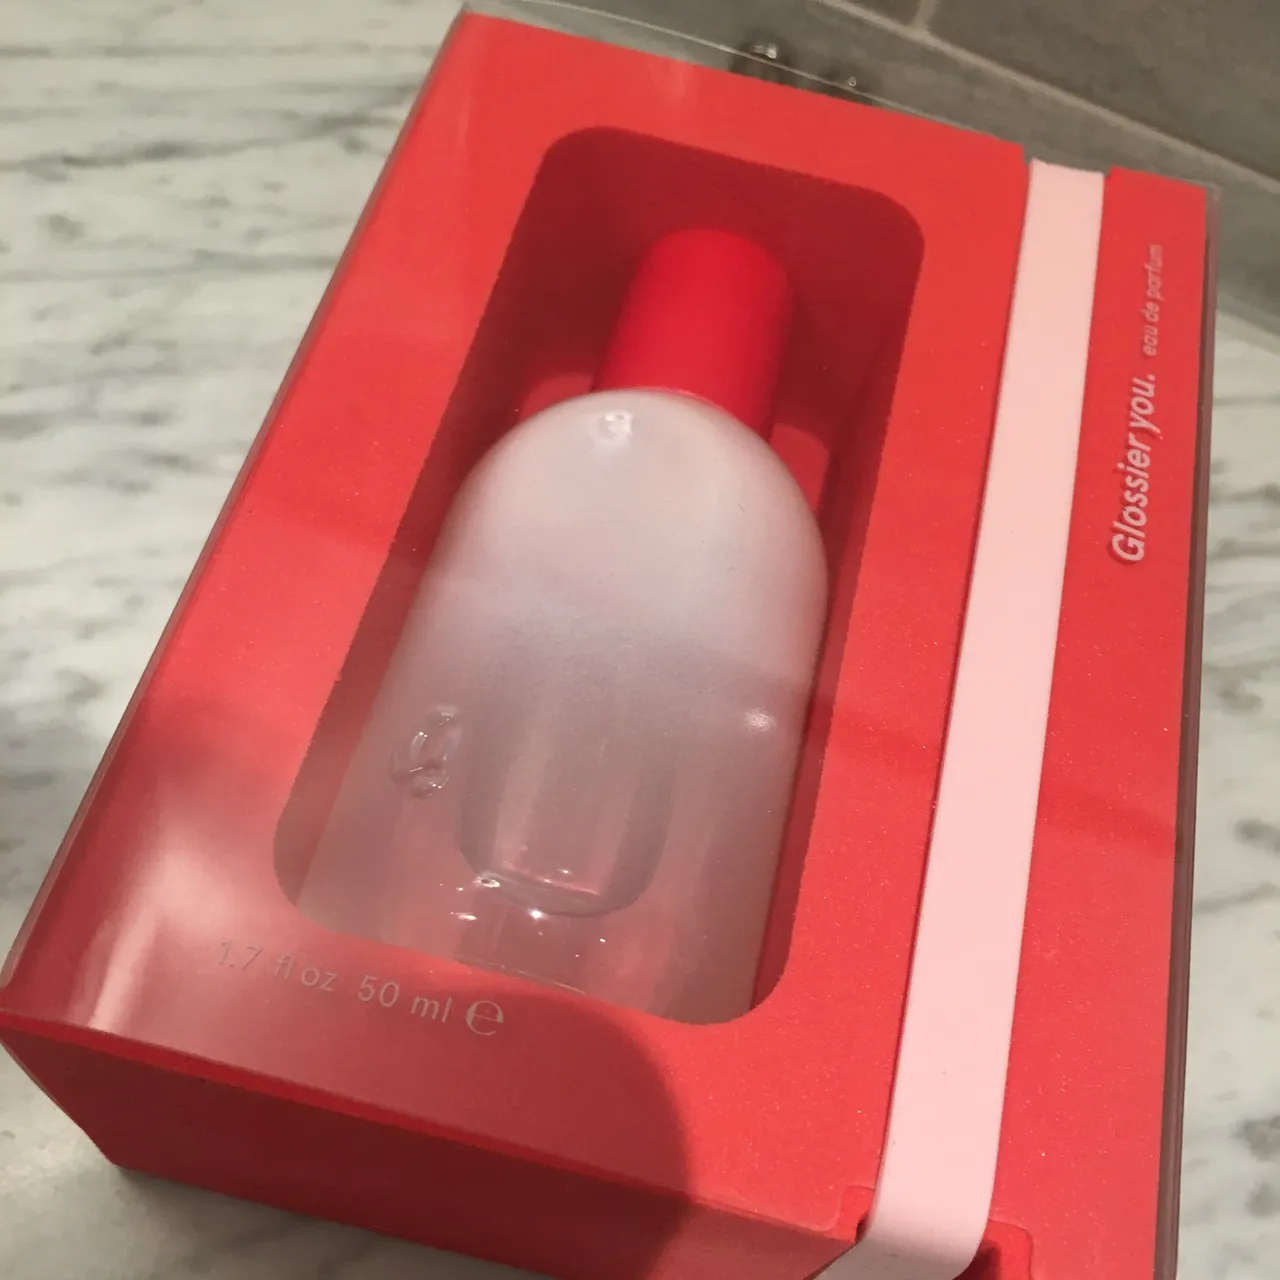 Glossier You Fragrance photo 4